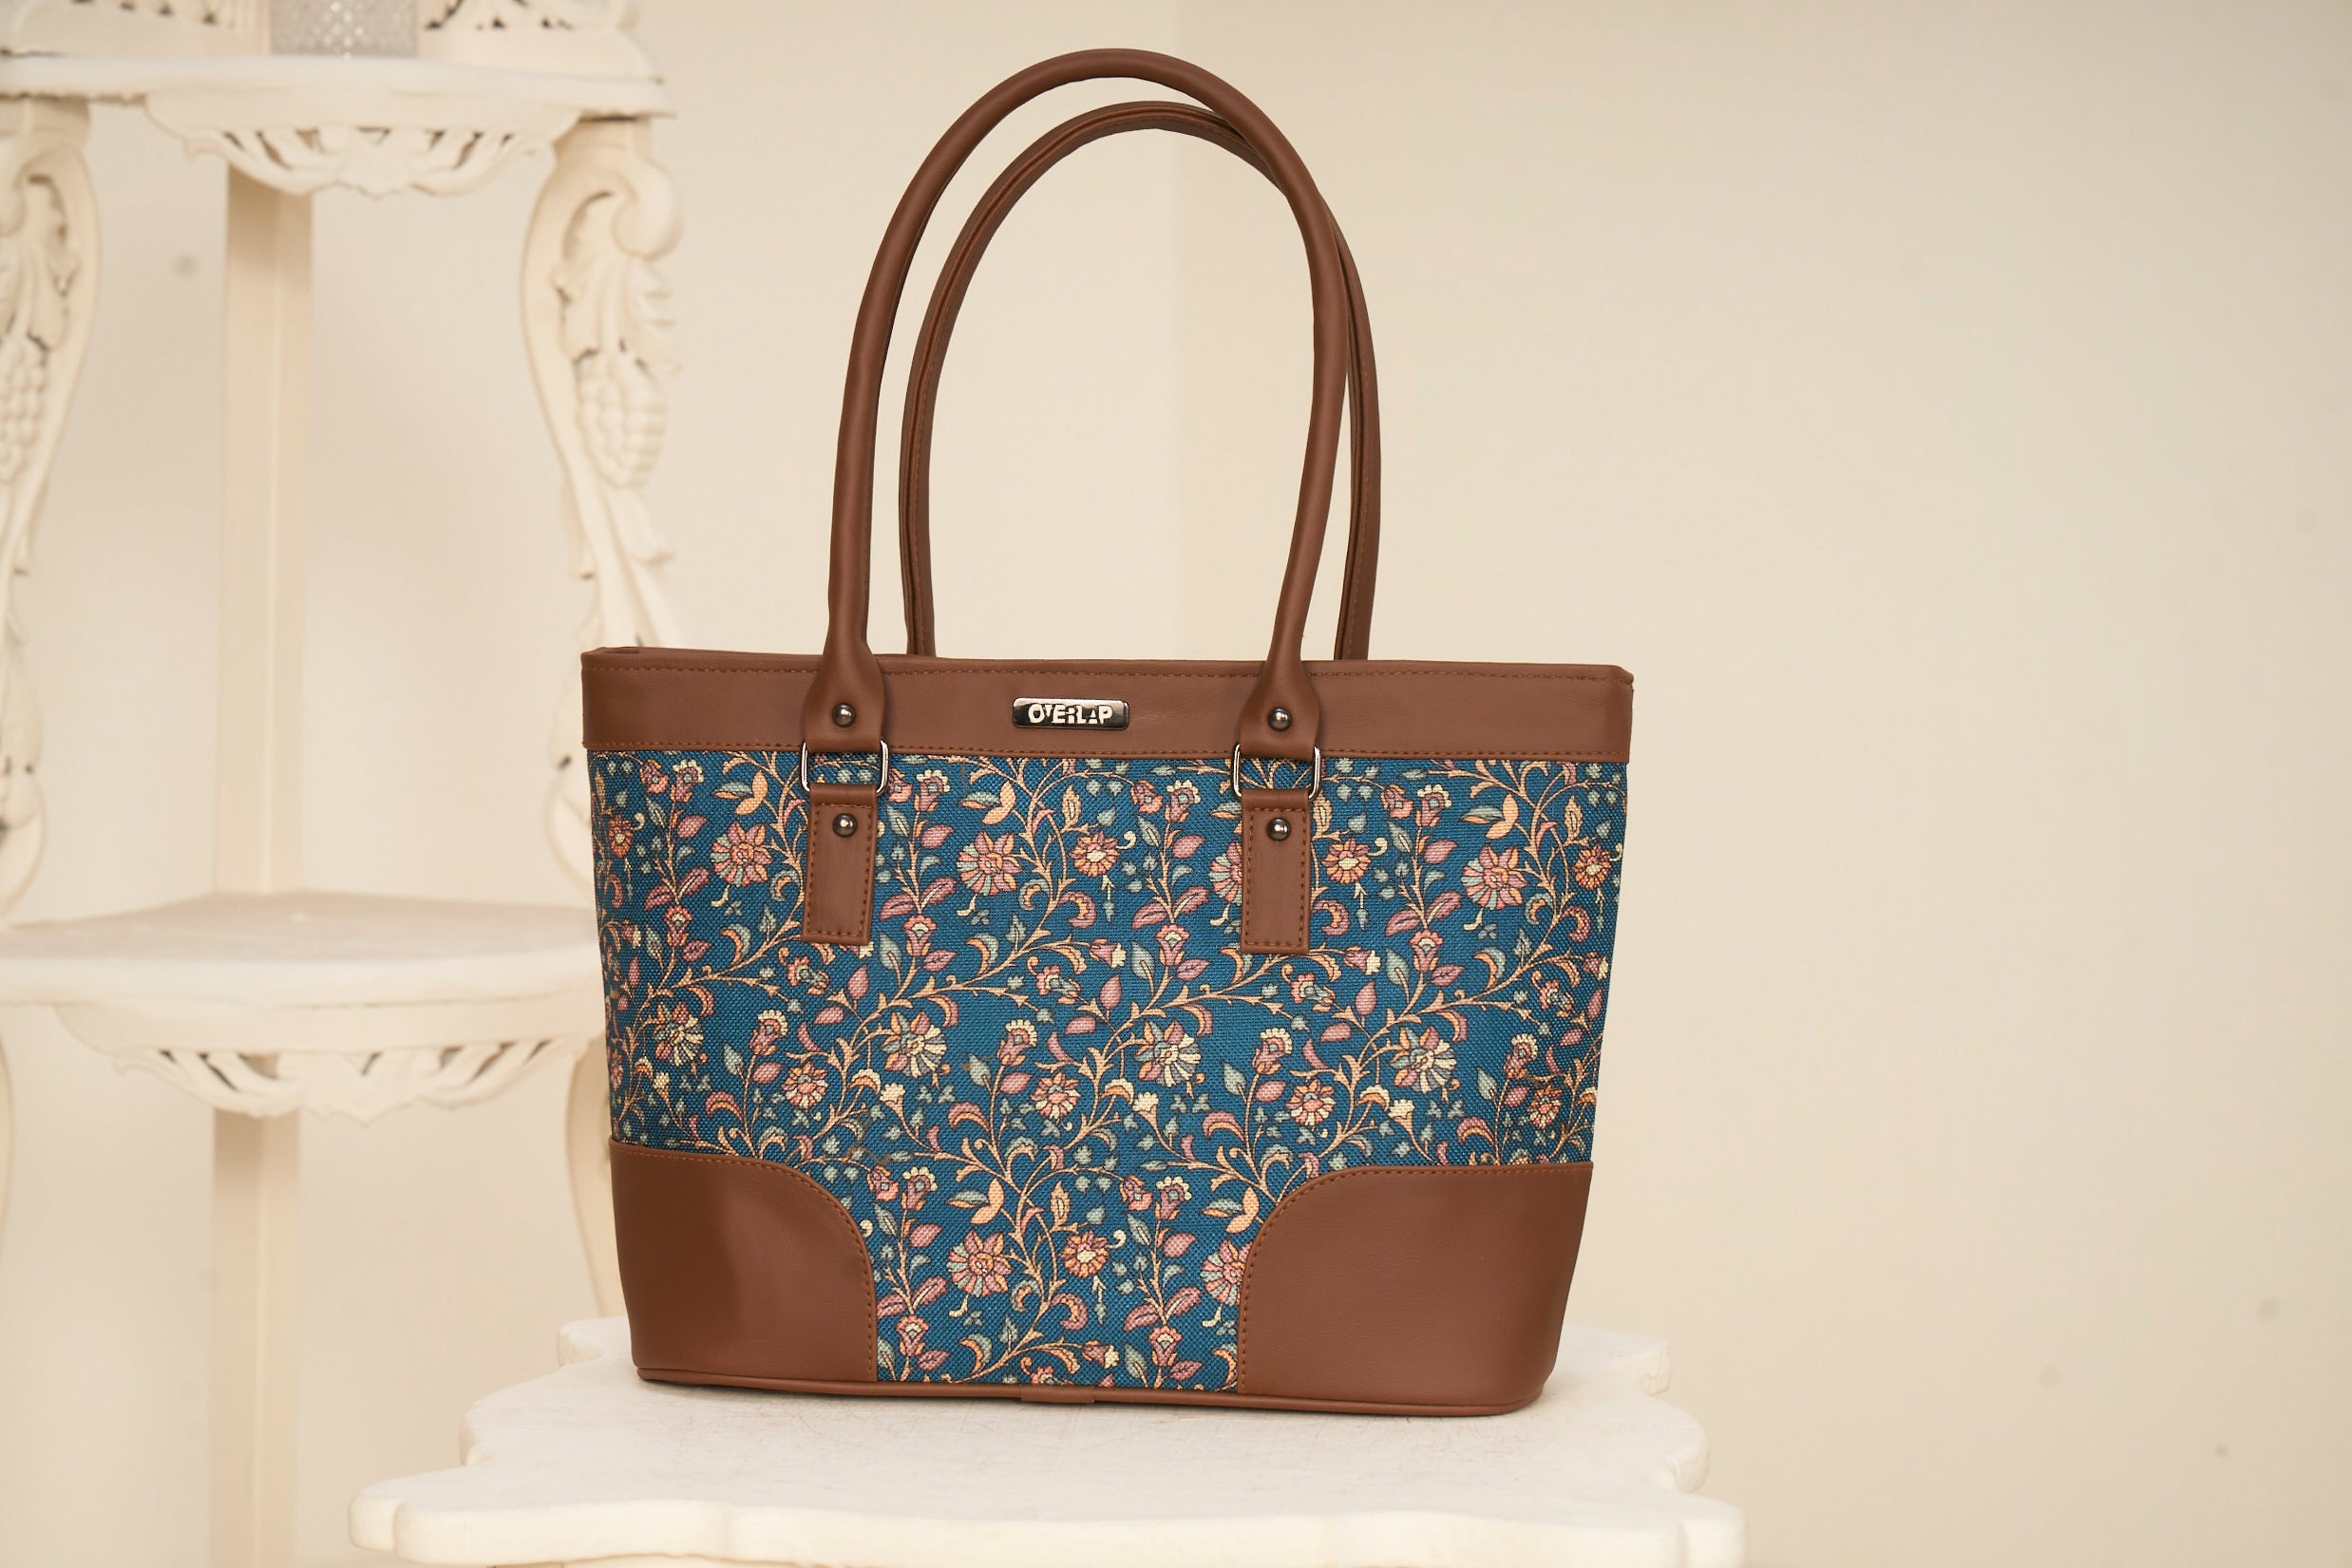 Everyday Adventure: Aora 006 - Printed PolyCotton Canvas Tote, Your Reliable Companion